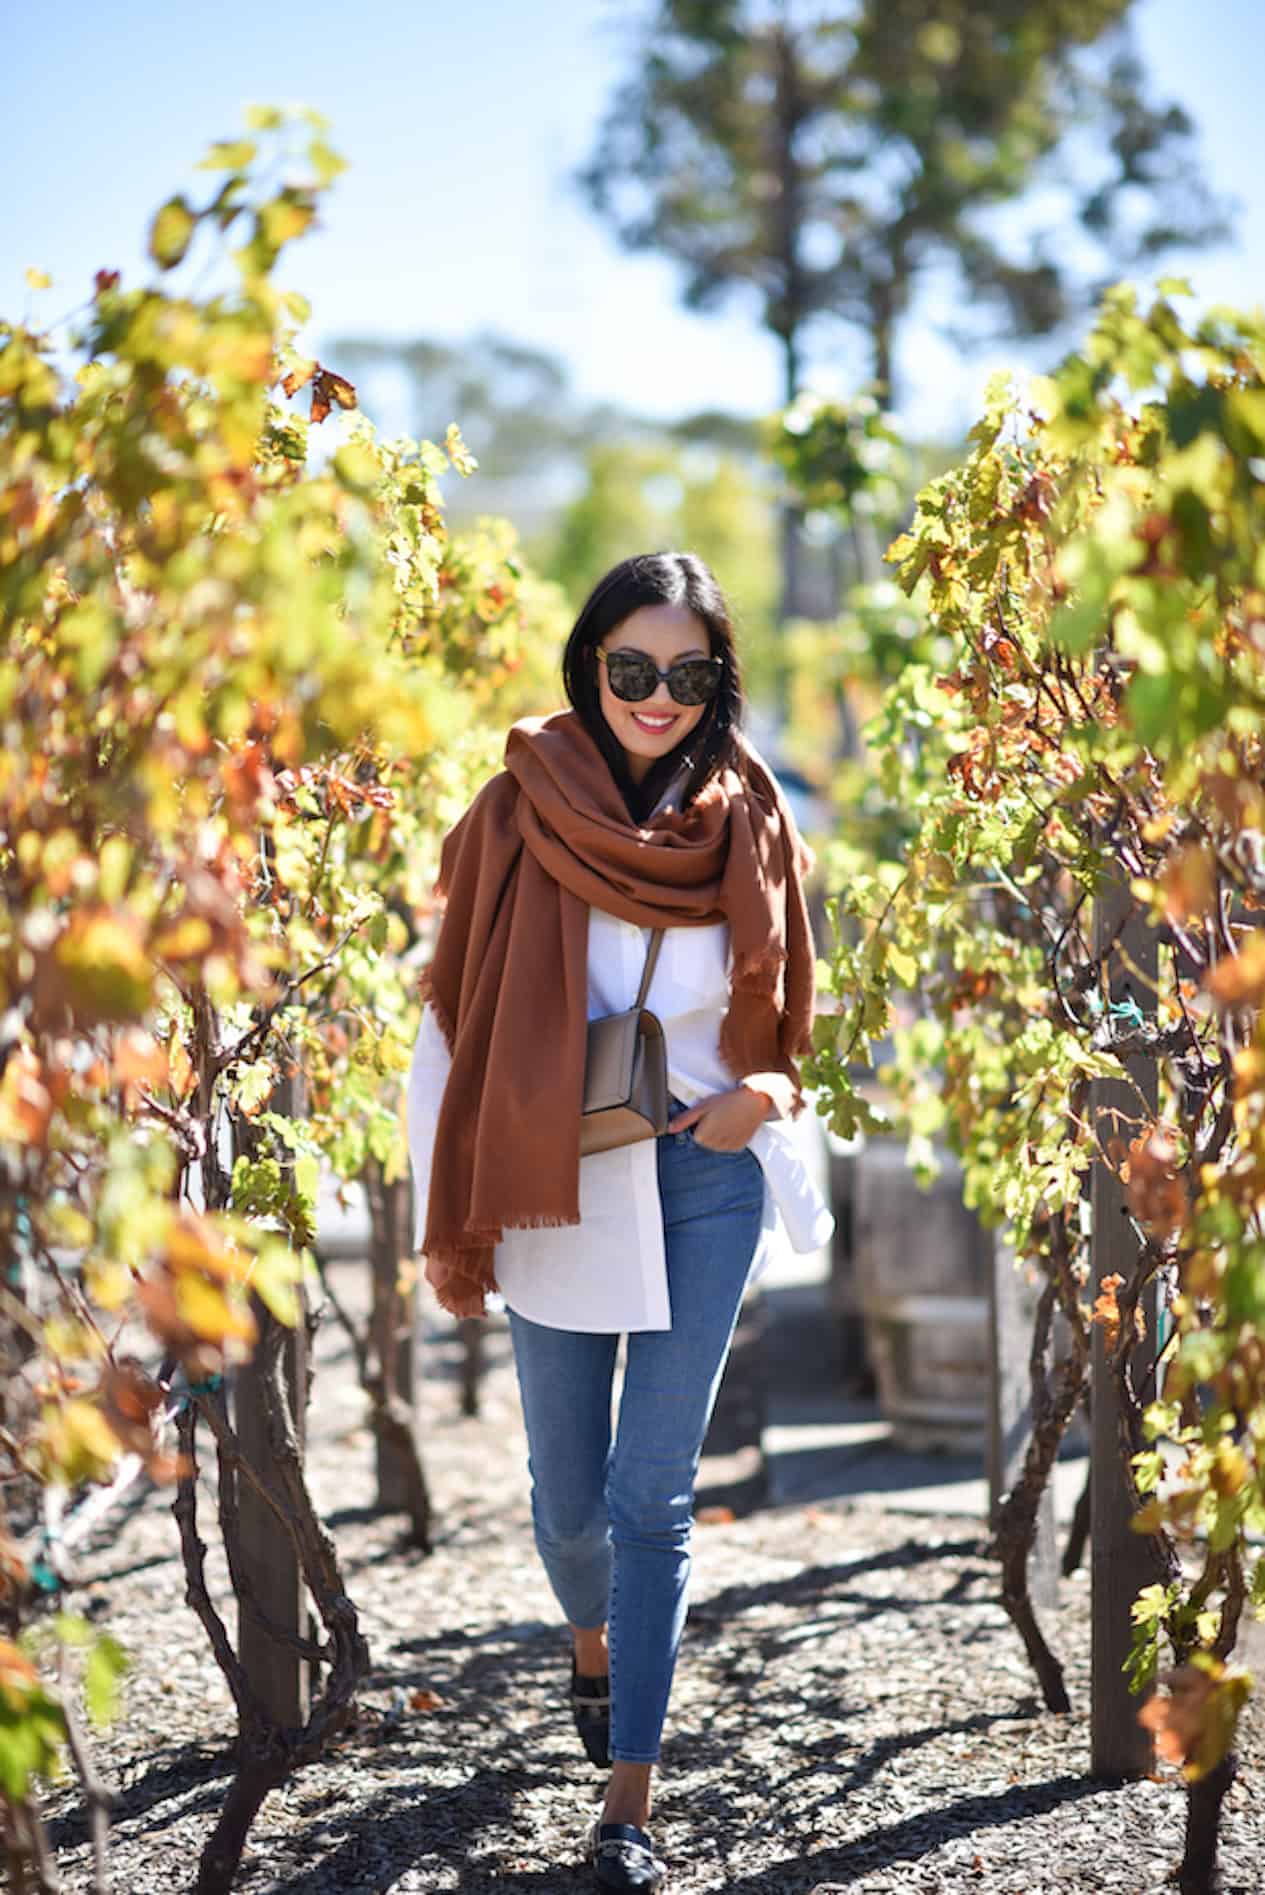 image of a woman walking through a vineyard wearing a white button up shirt, jeans, loafers, and a large brown scarf